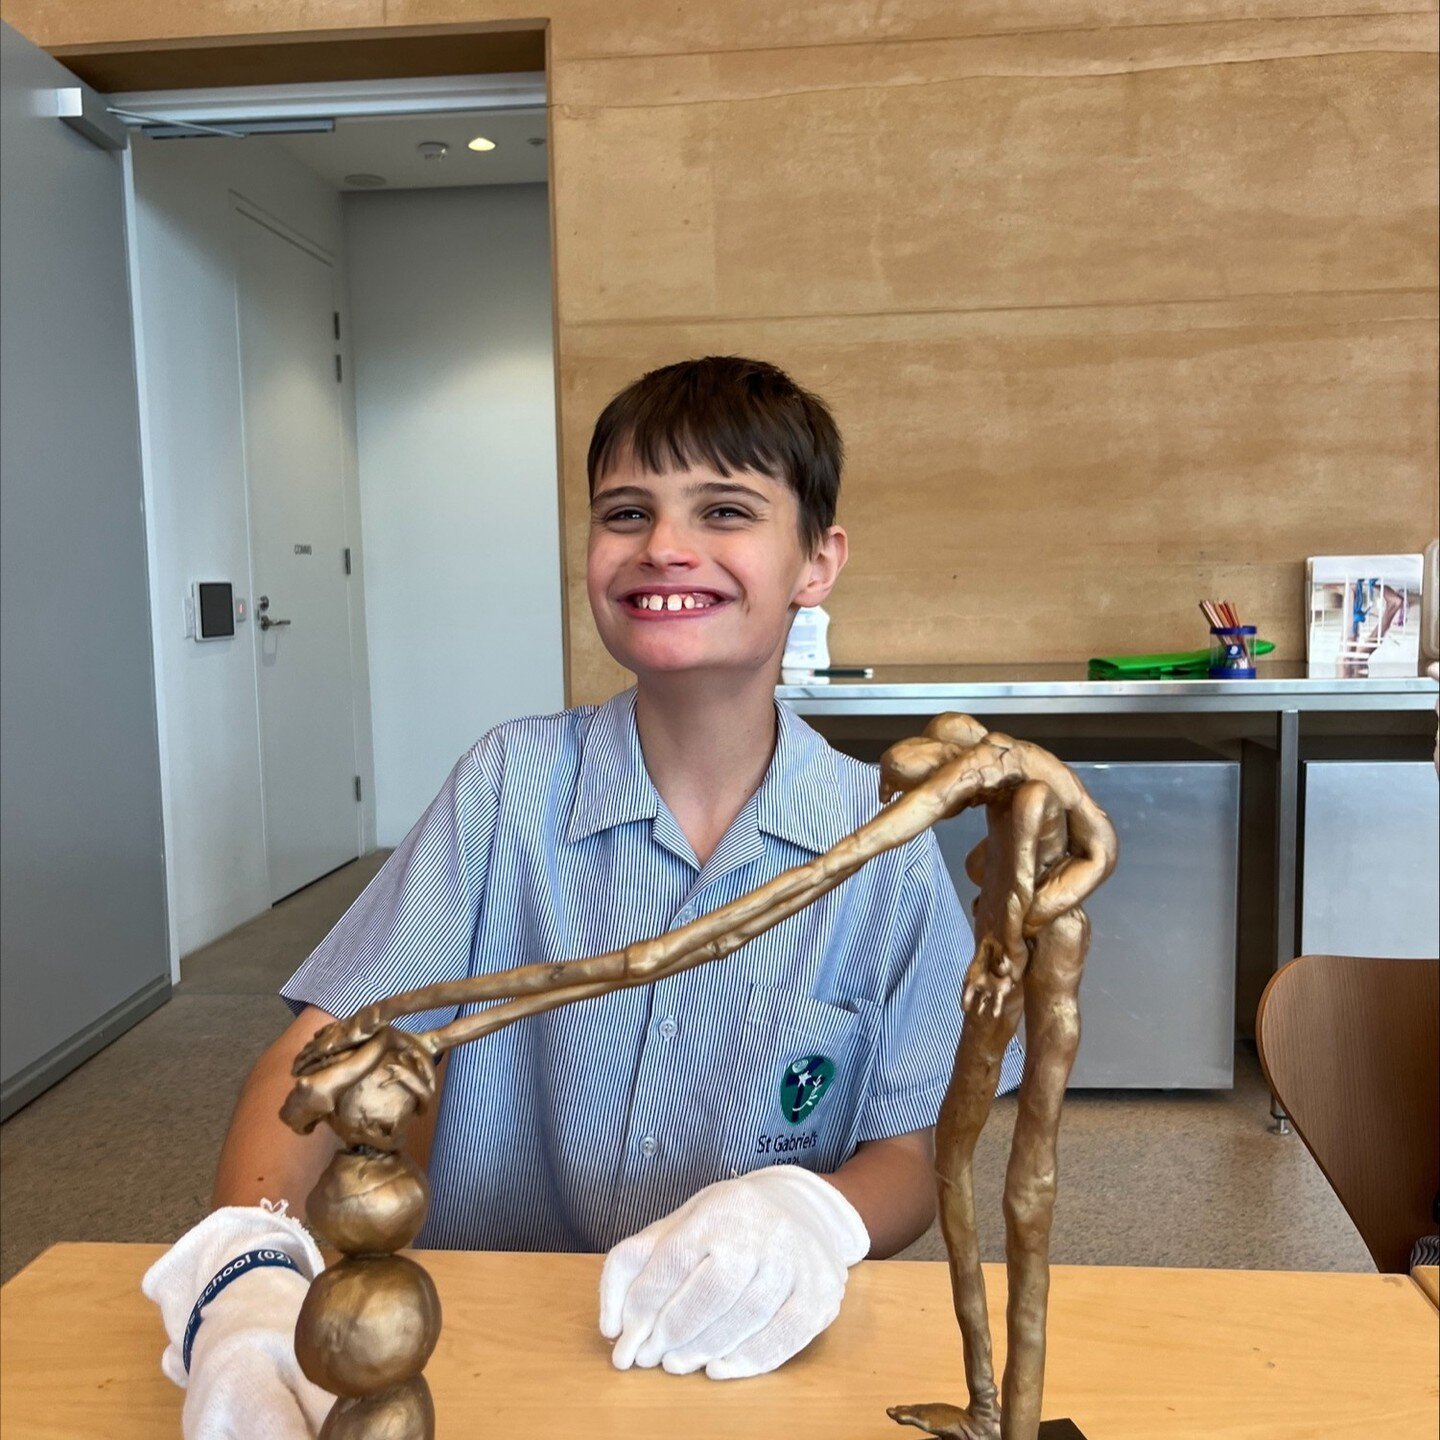 Year 8 students attended a tactile and multi sensory gallery visit and workshop at the Art Gallery of New South Wales. They were able to see a range of sculptural works, interact with prototypes and small scale models as well as create their own wate